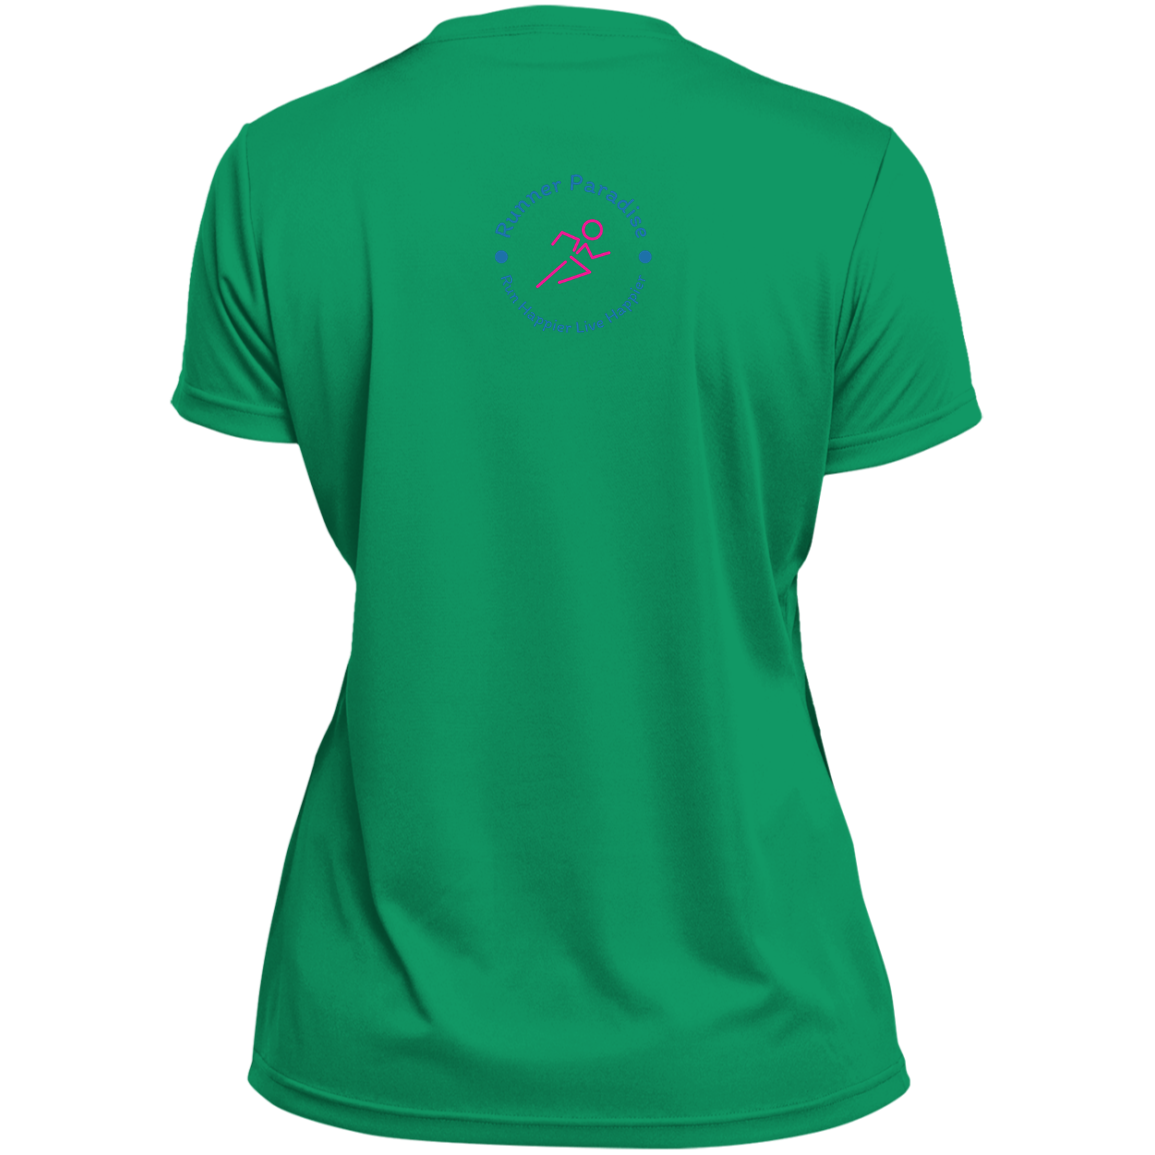 Women's Inspirational Top Be inspired by your progress, not defined by your pace